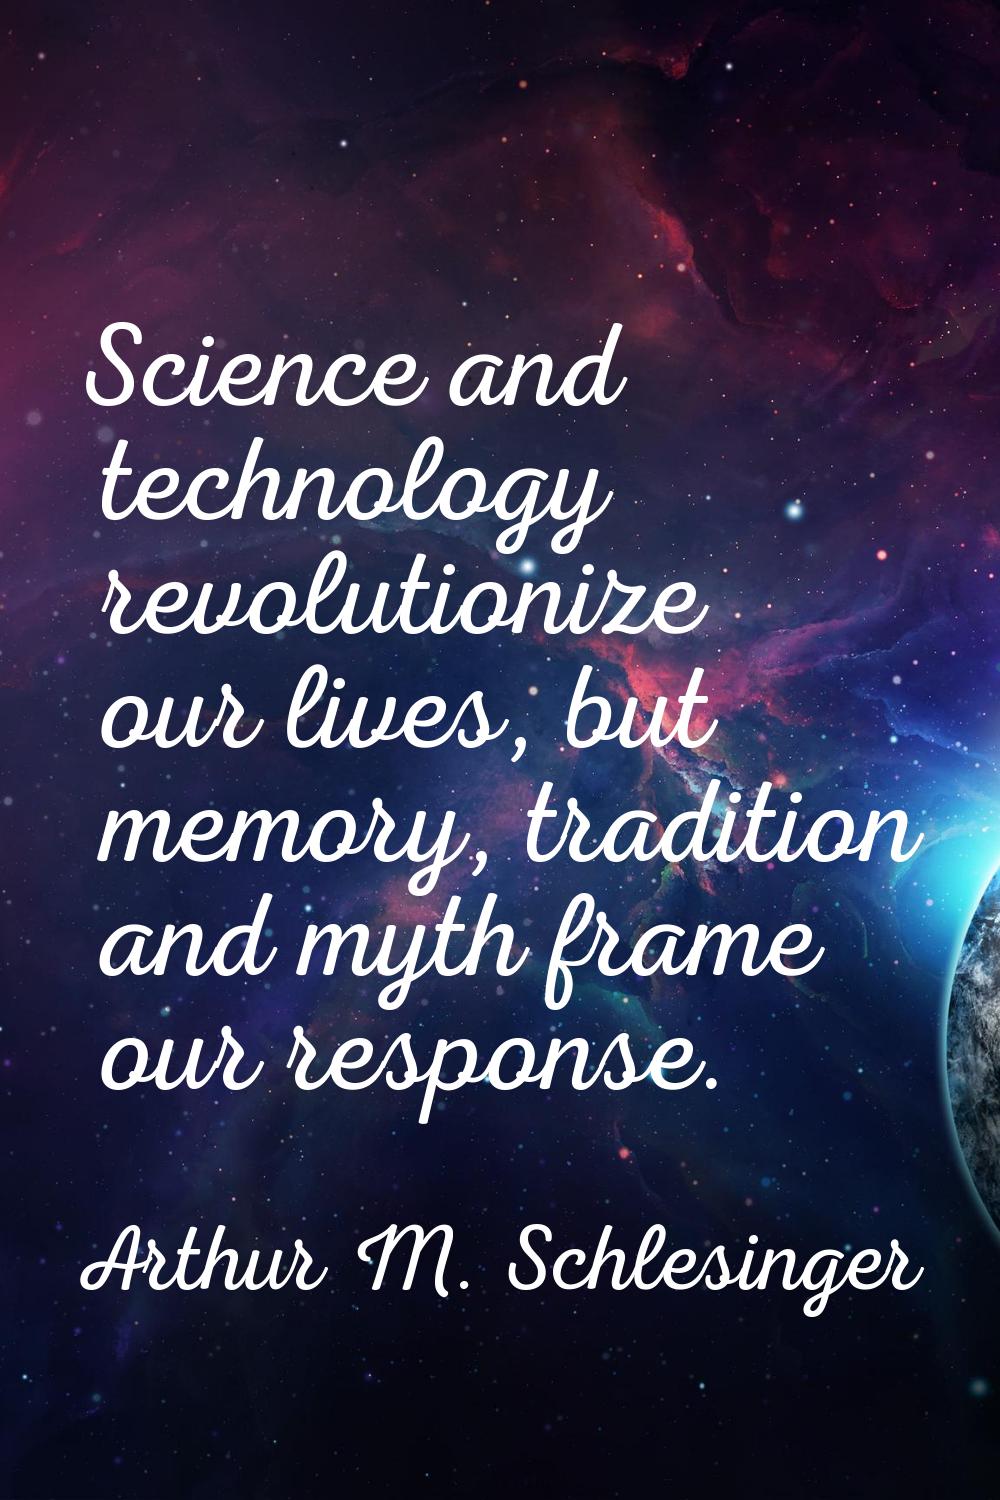 Science and technology revolutionize our lives, but memory, tradition and myth frame our response.